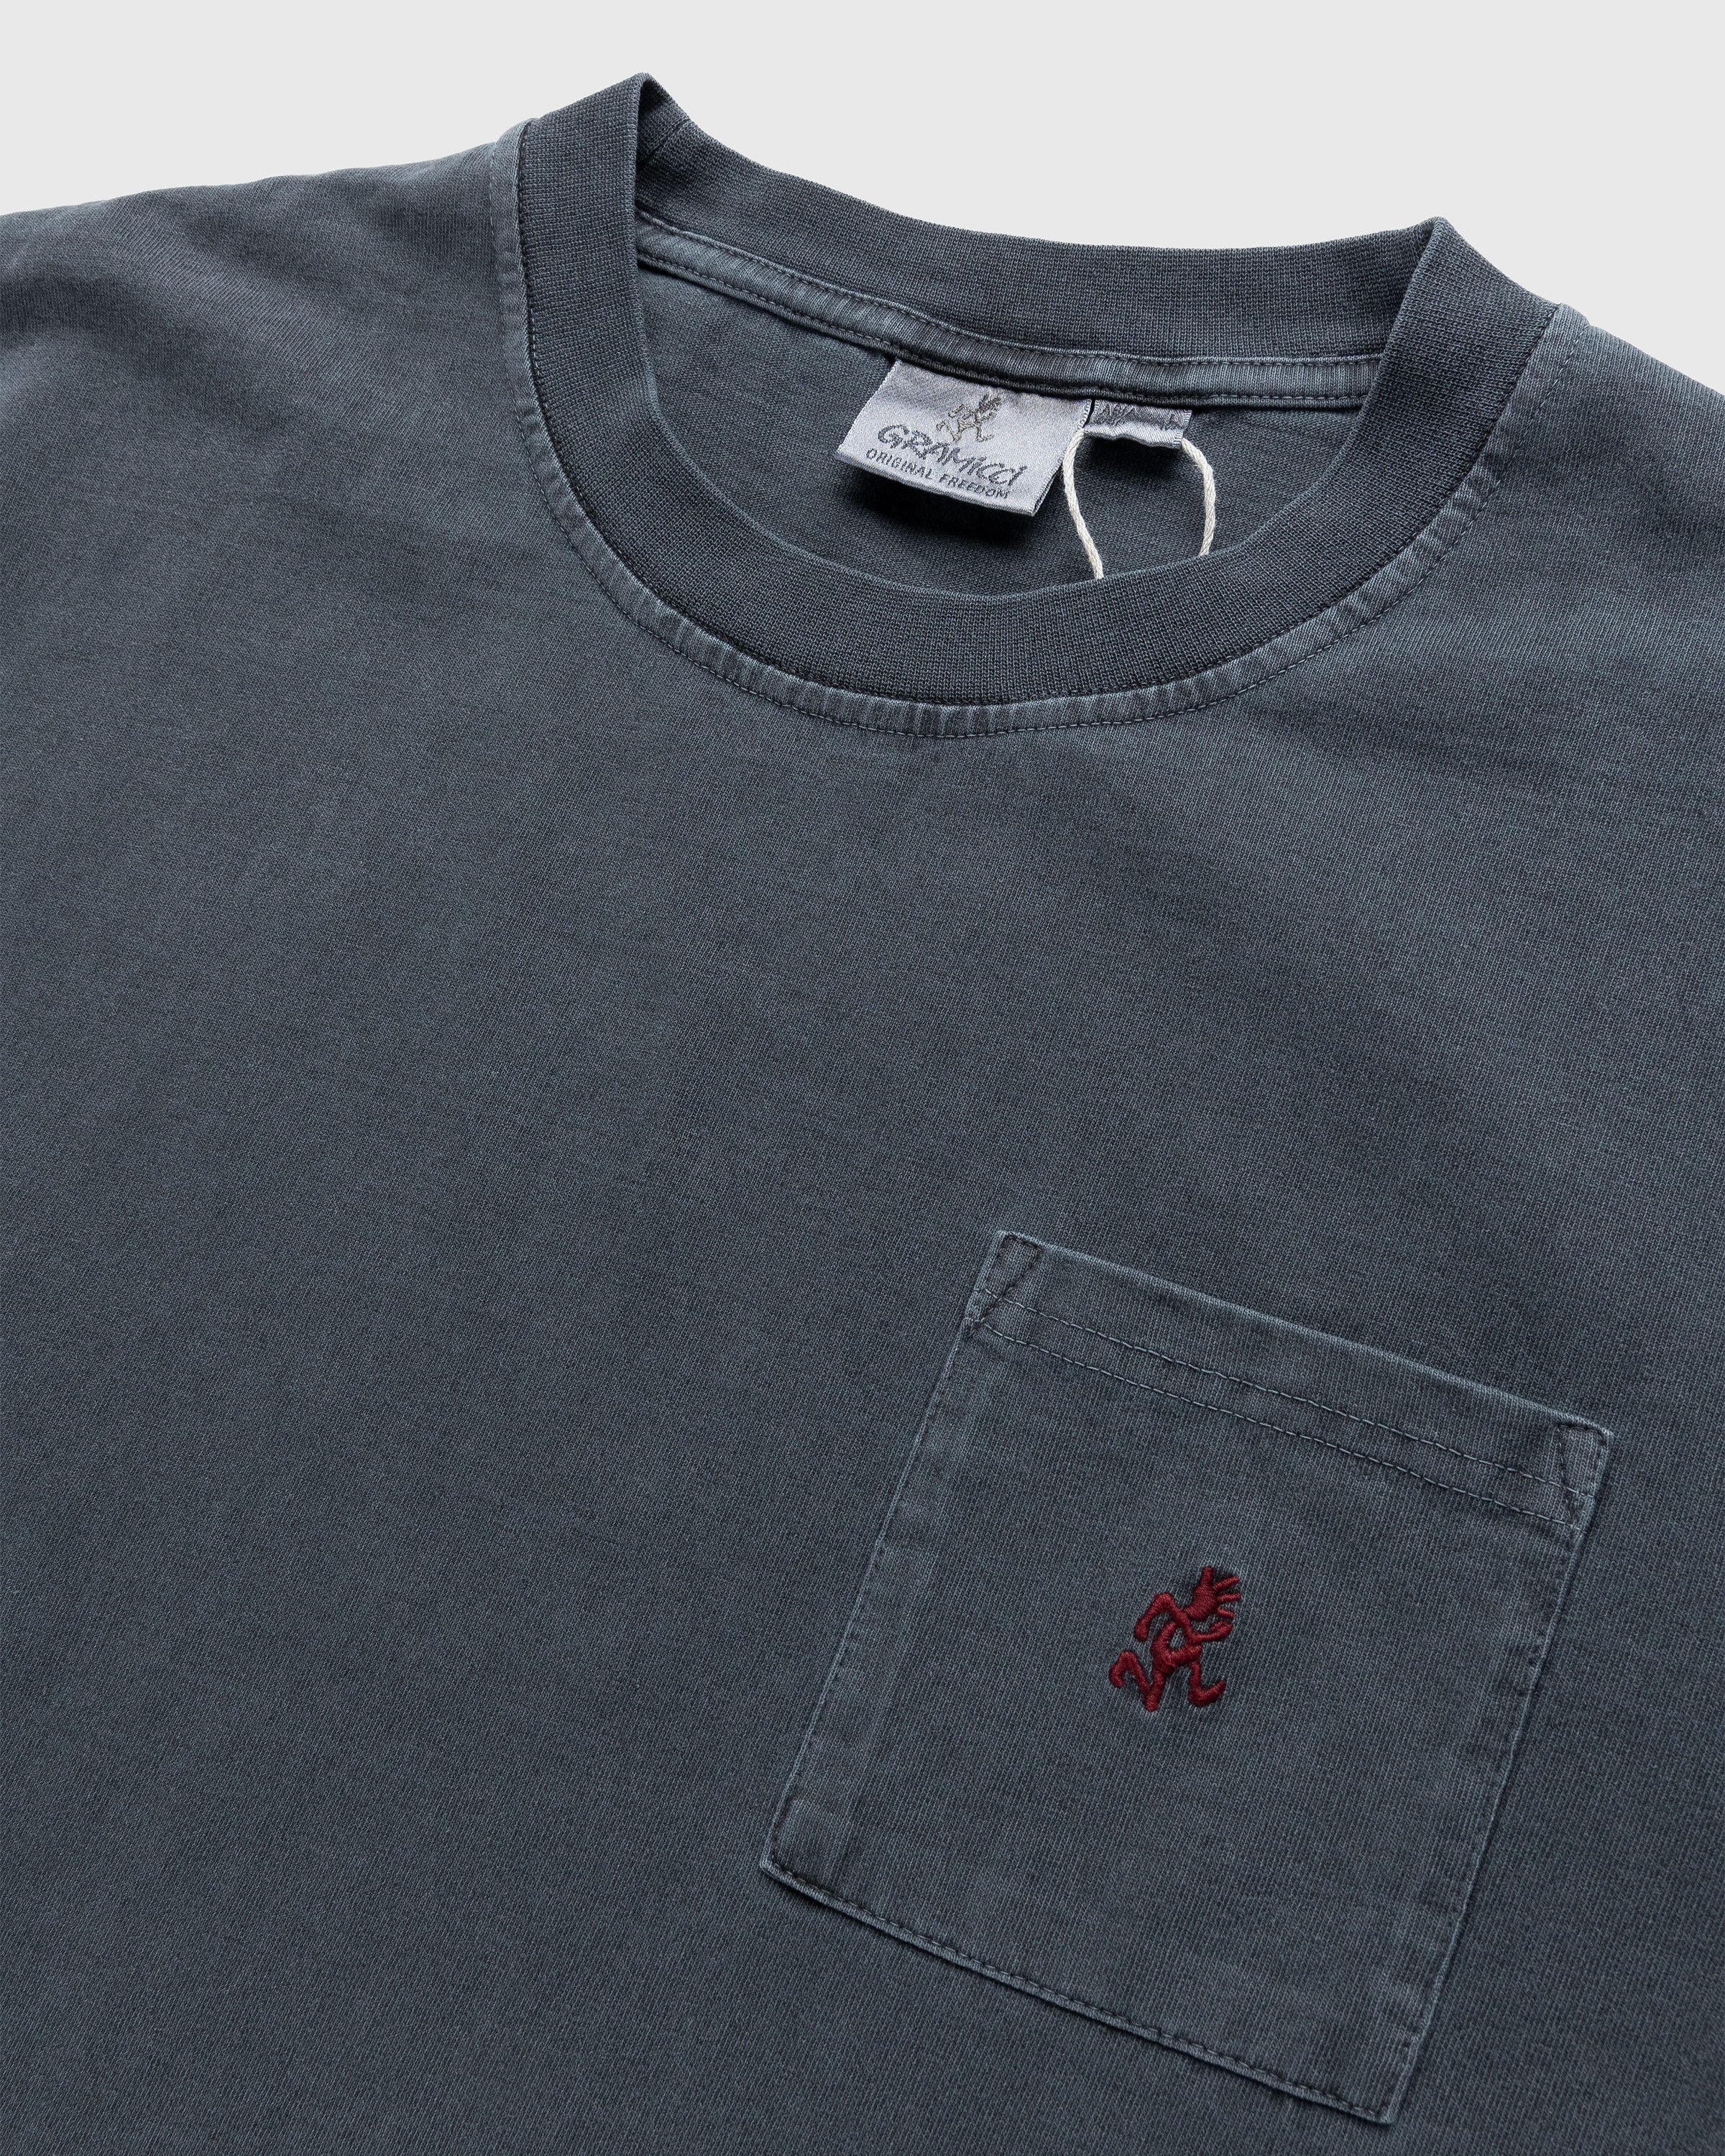 Gramicci - One Point Tee Grey Pigment - Clothing - Grey - Image 3